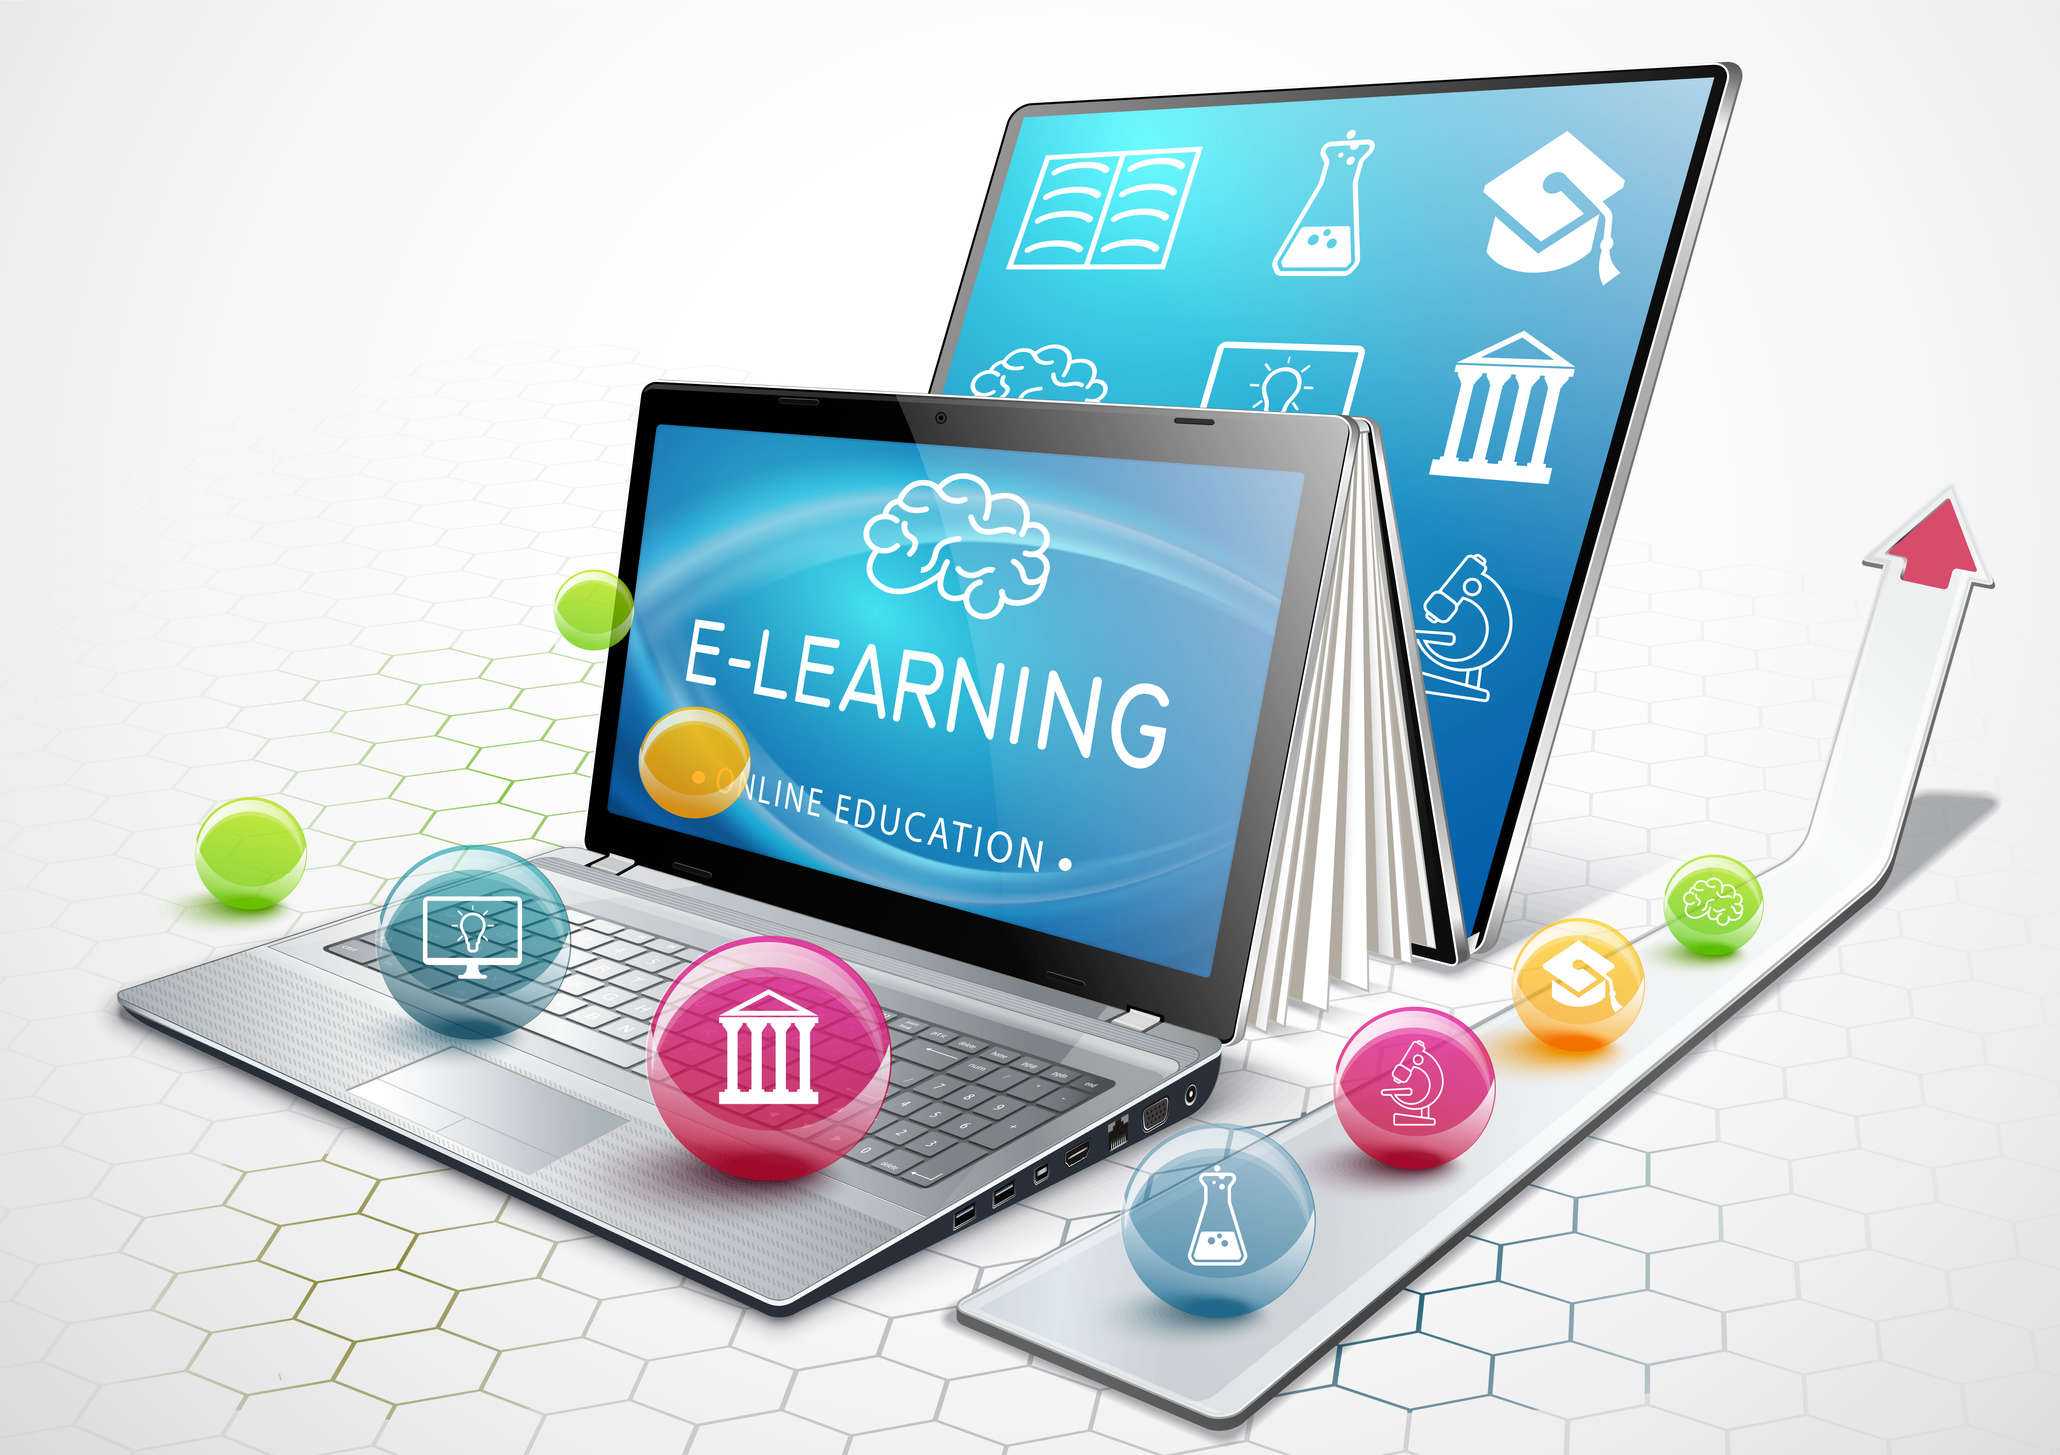 The concept of e-learning. Education online. Laptop as an ebook. Getting an education. Illustration